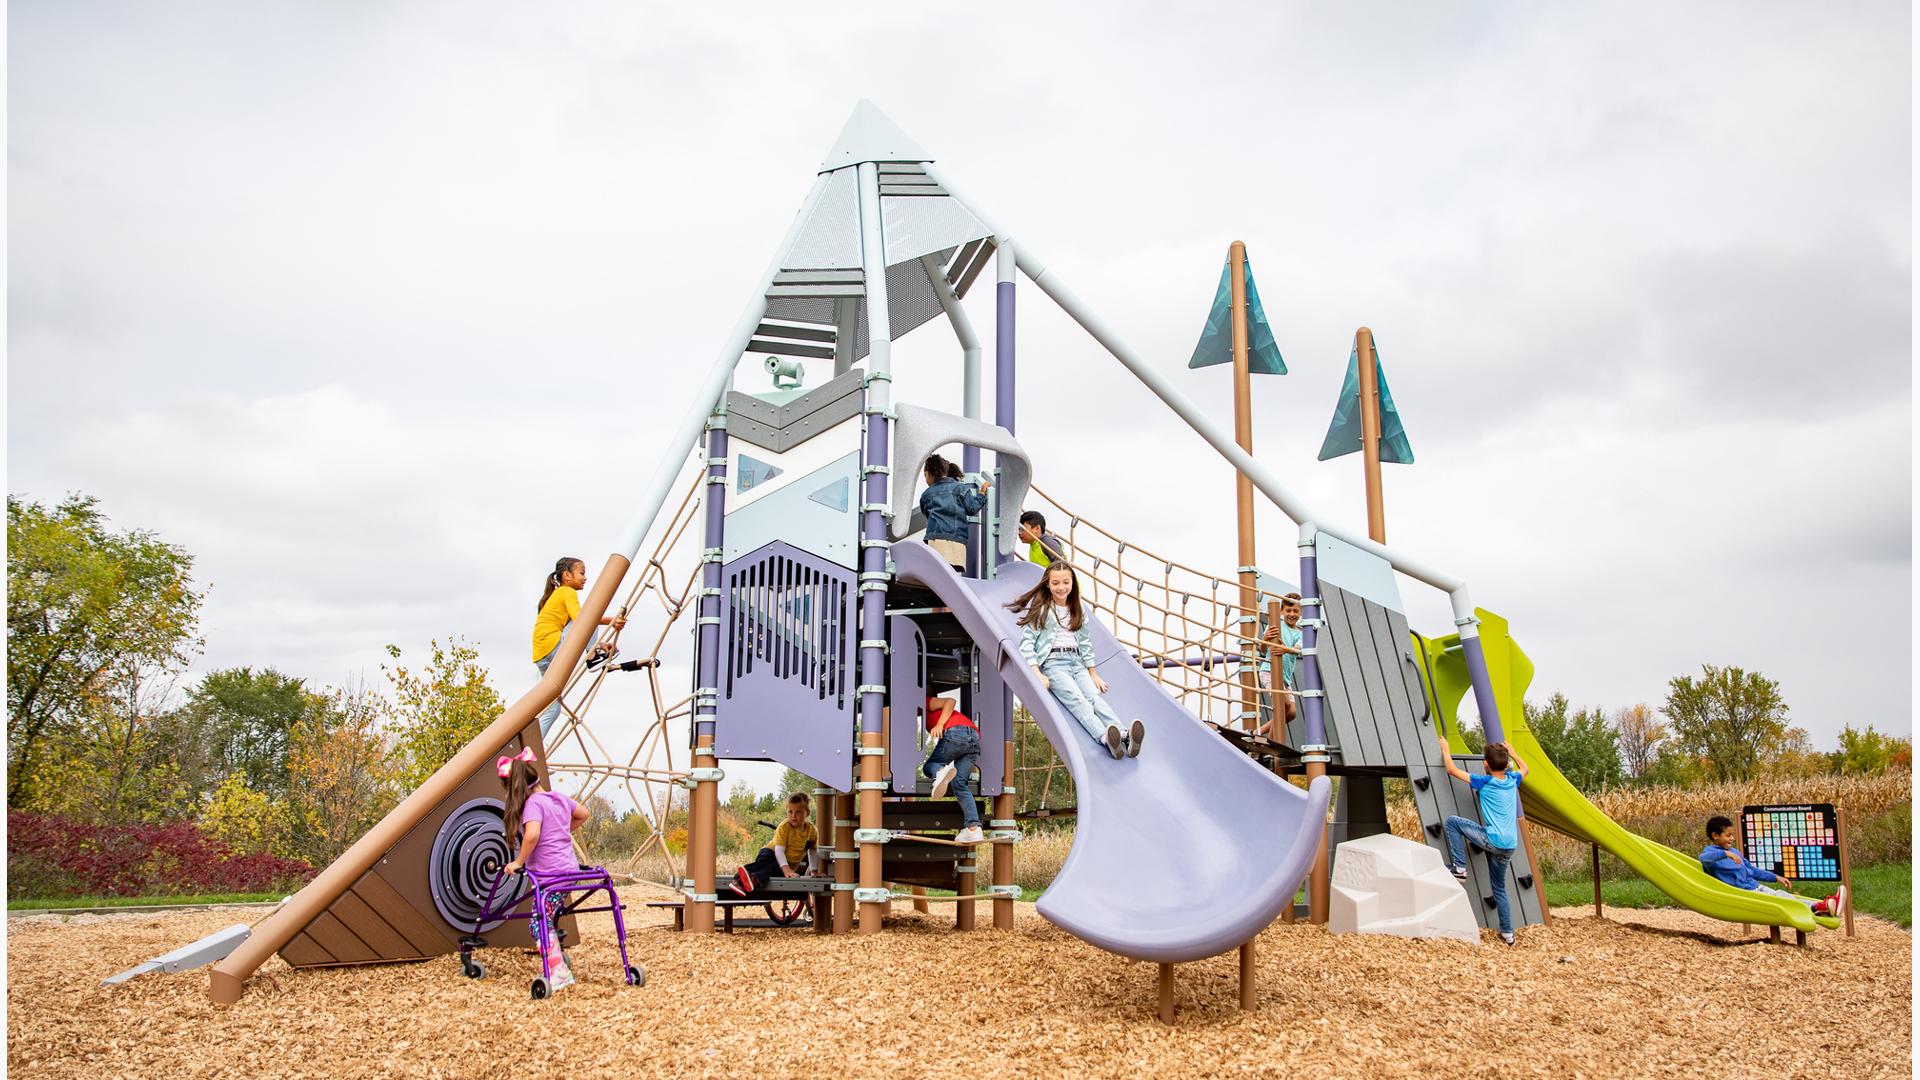 Playground Equipment and Designs - Landscape Structures